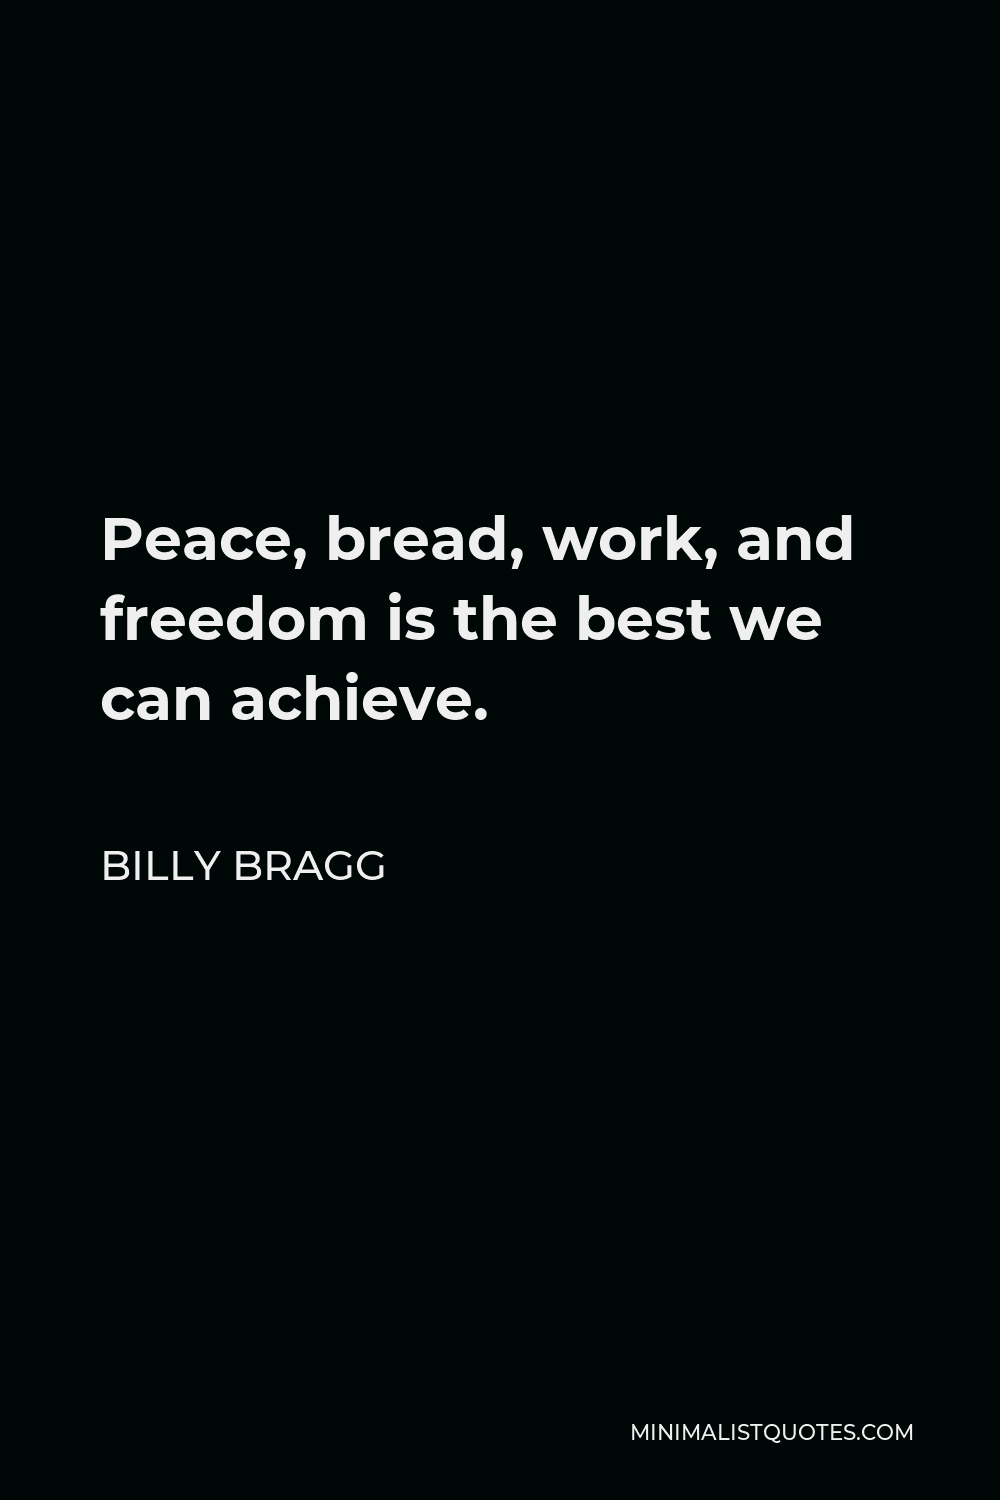 Billy Bragg Quote - Peace, bread, work, and freedom is the best we can achieve.